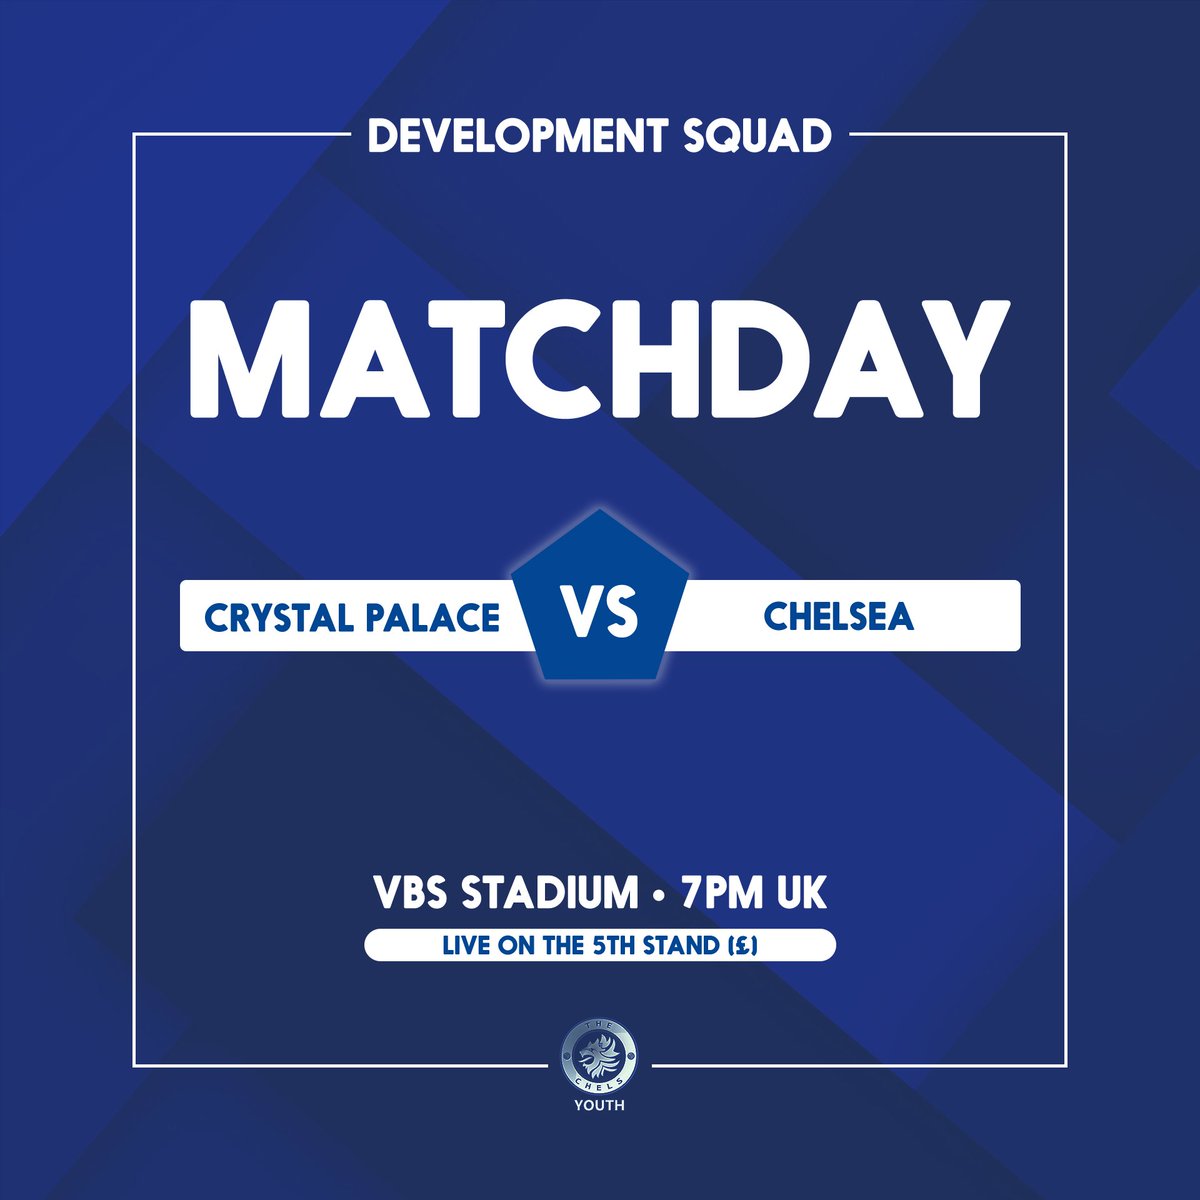 #CFCDev have two more games left before the #PL2 playoffs begin and will be targeting third place as the highest possible seed they can take. They're away to Crystal Palace tonight in the first of those two games.